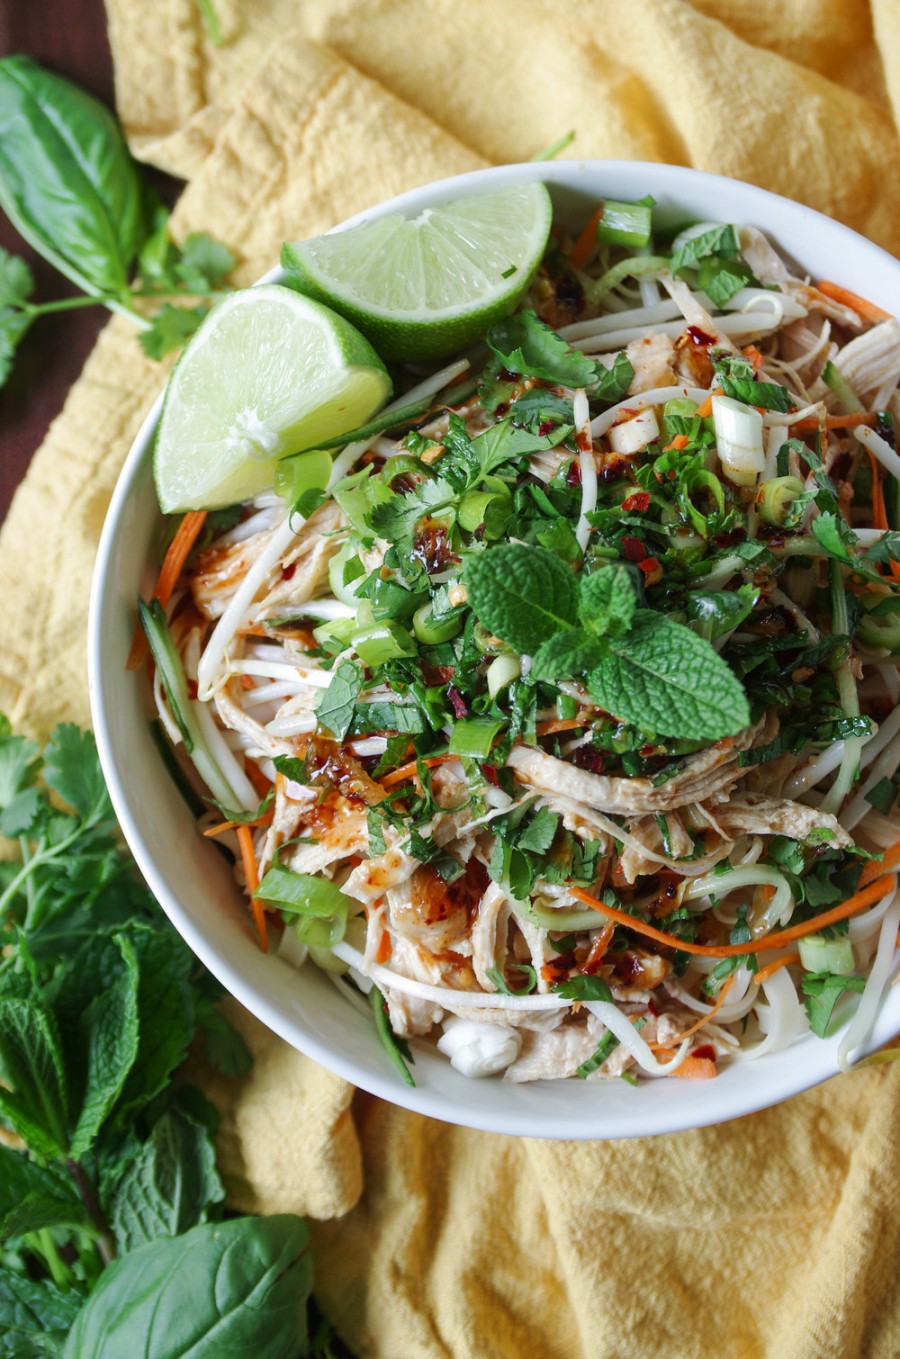 Cold Noodle Salad with Chicken and Sesame Dressing